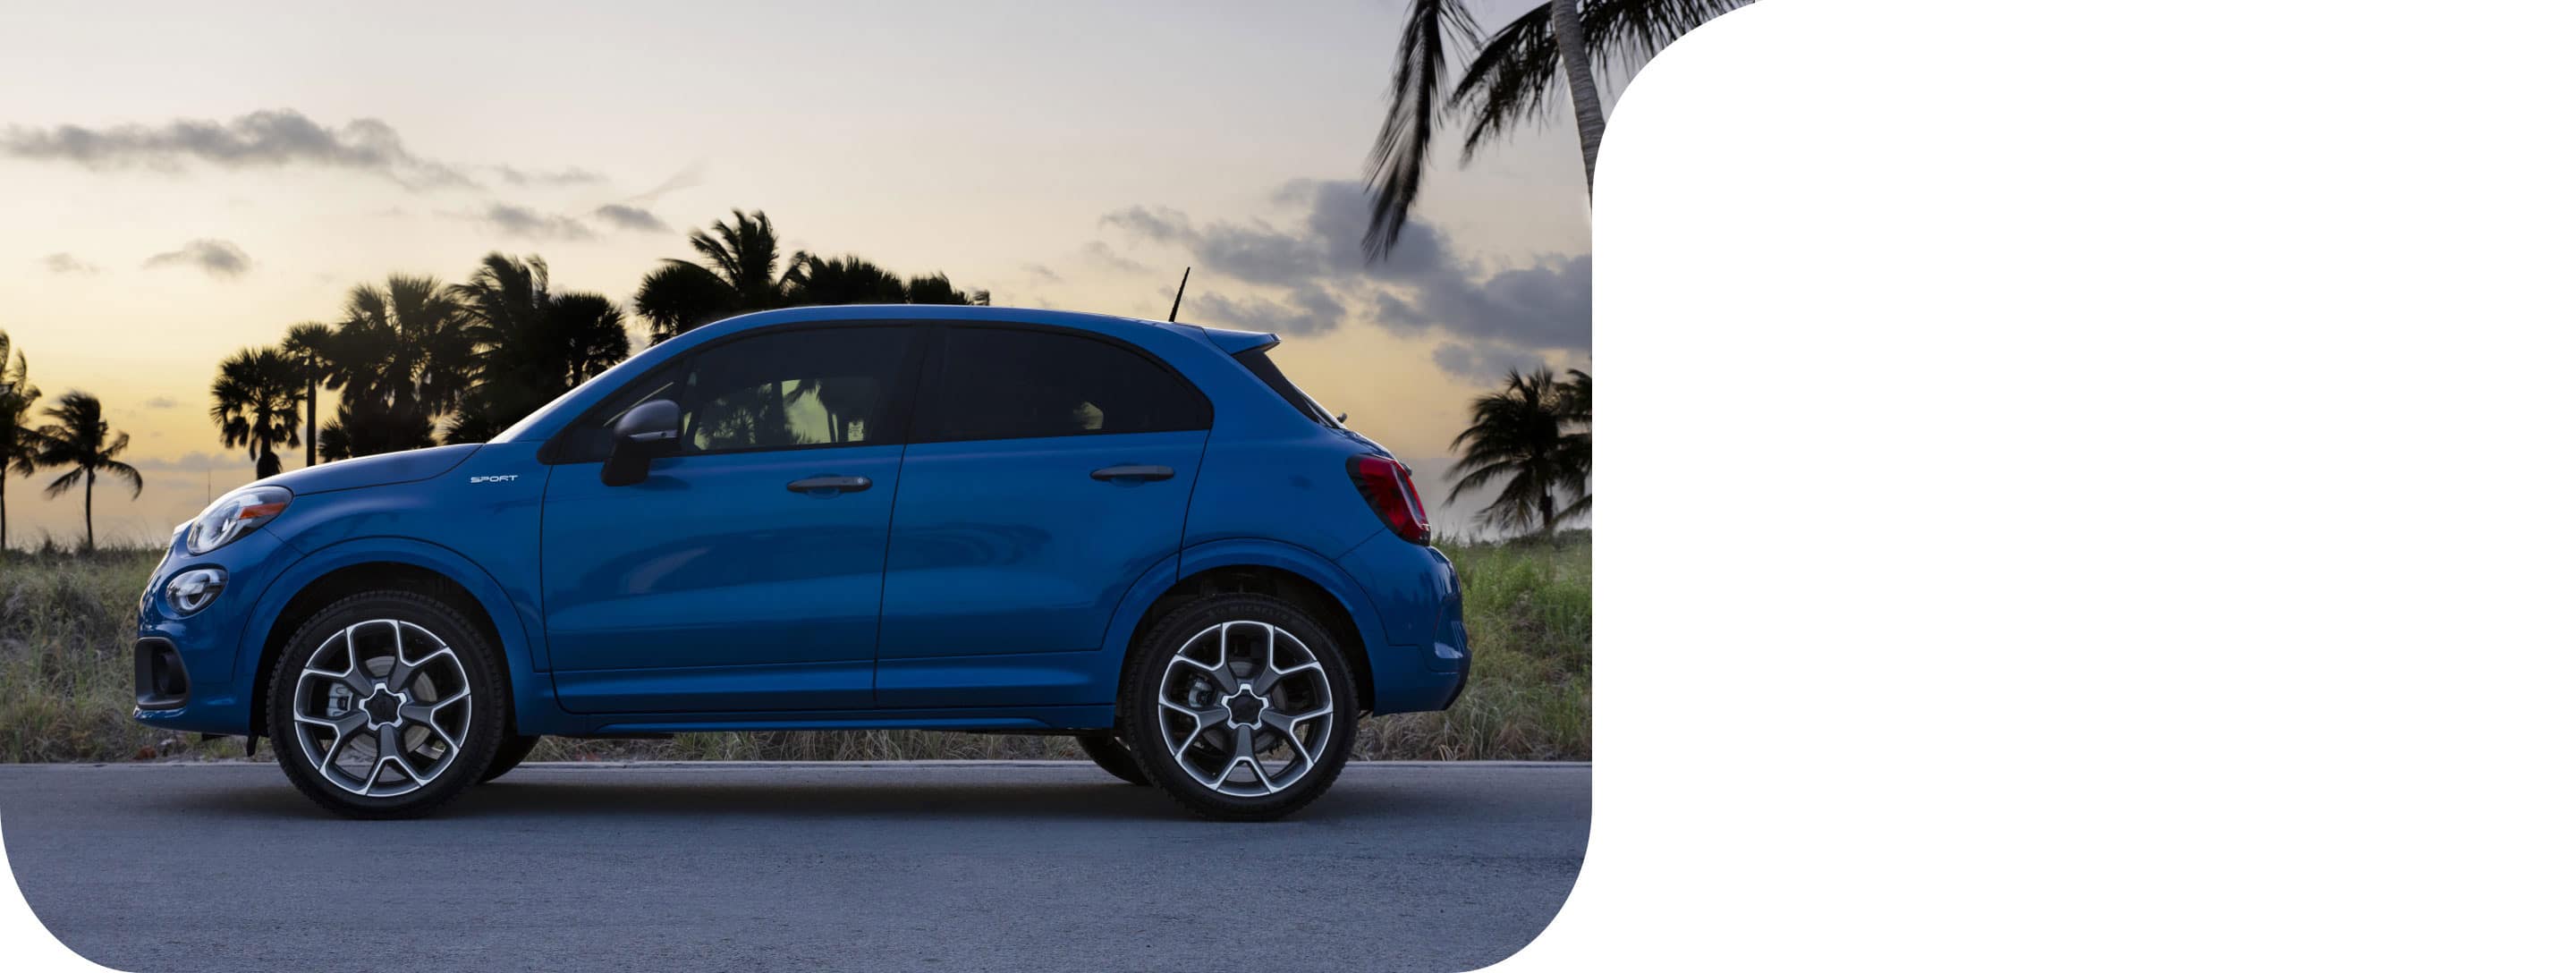 A profile view of a blue 2021 Fiat 500X Sport parked with palm trees in the background.